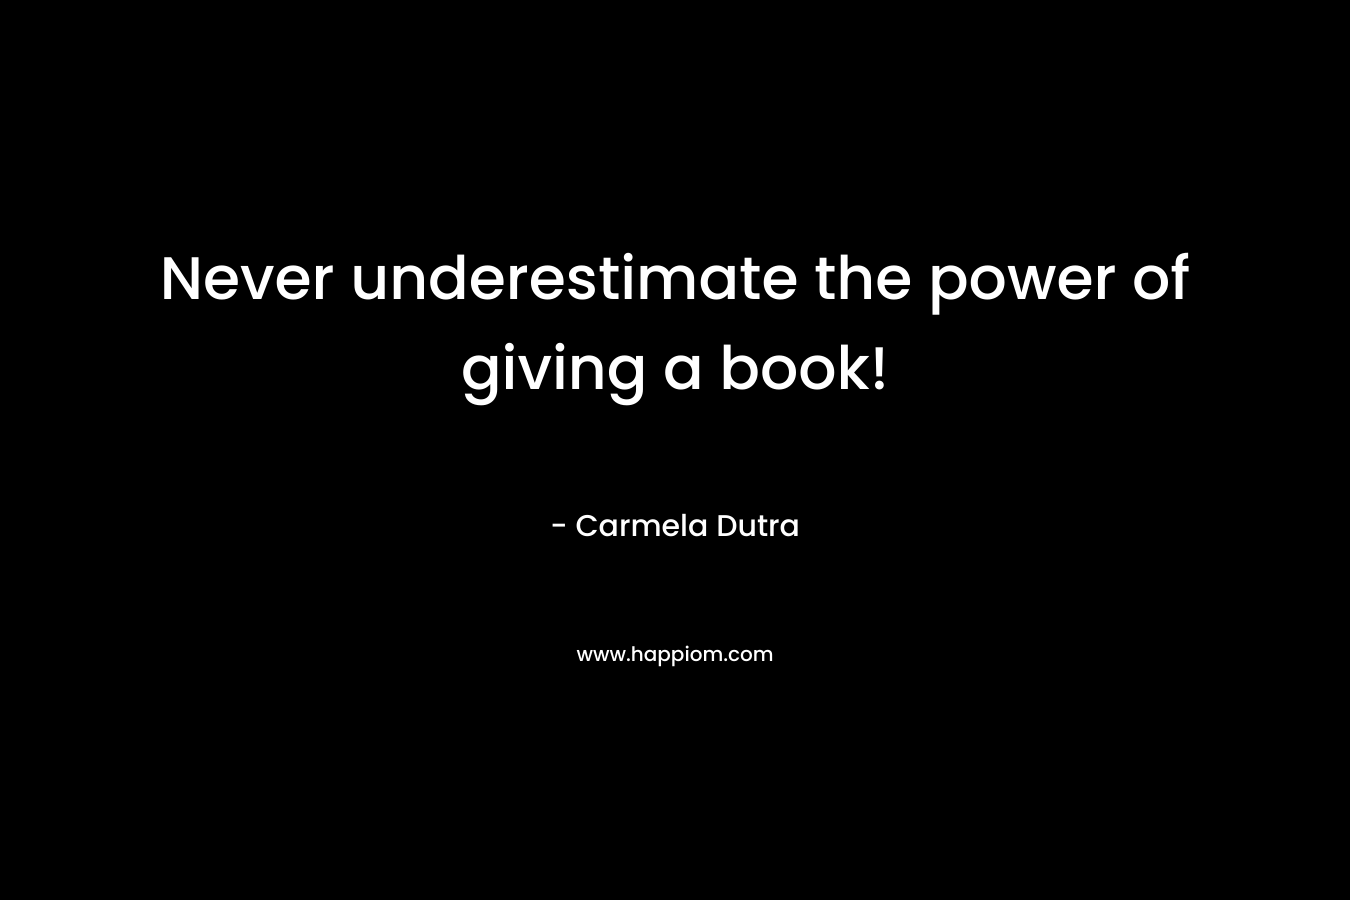 Never underestimate the power of giving a book!